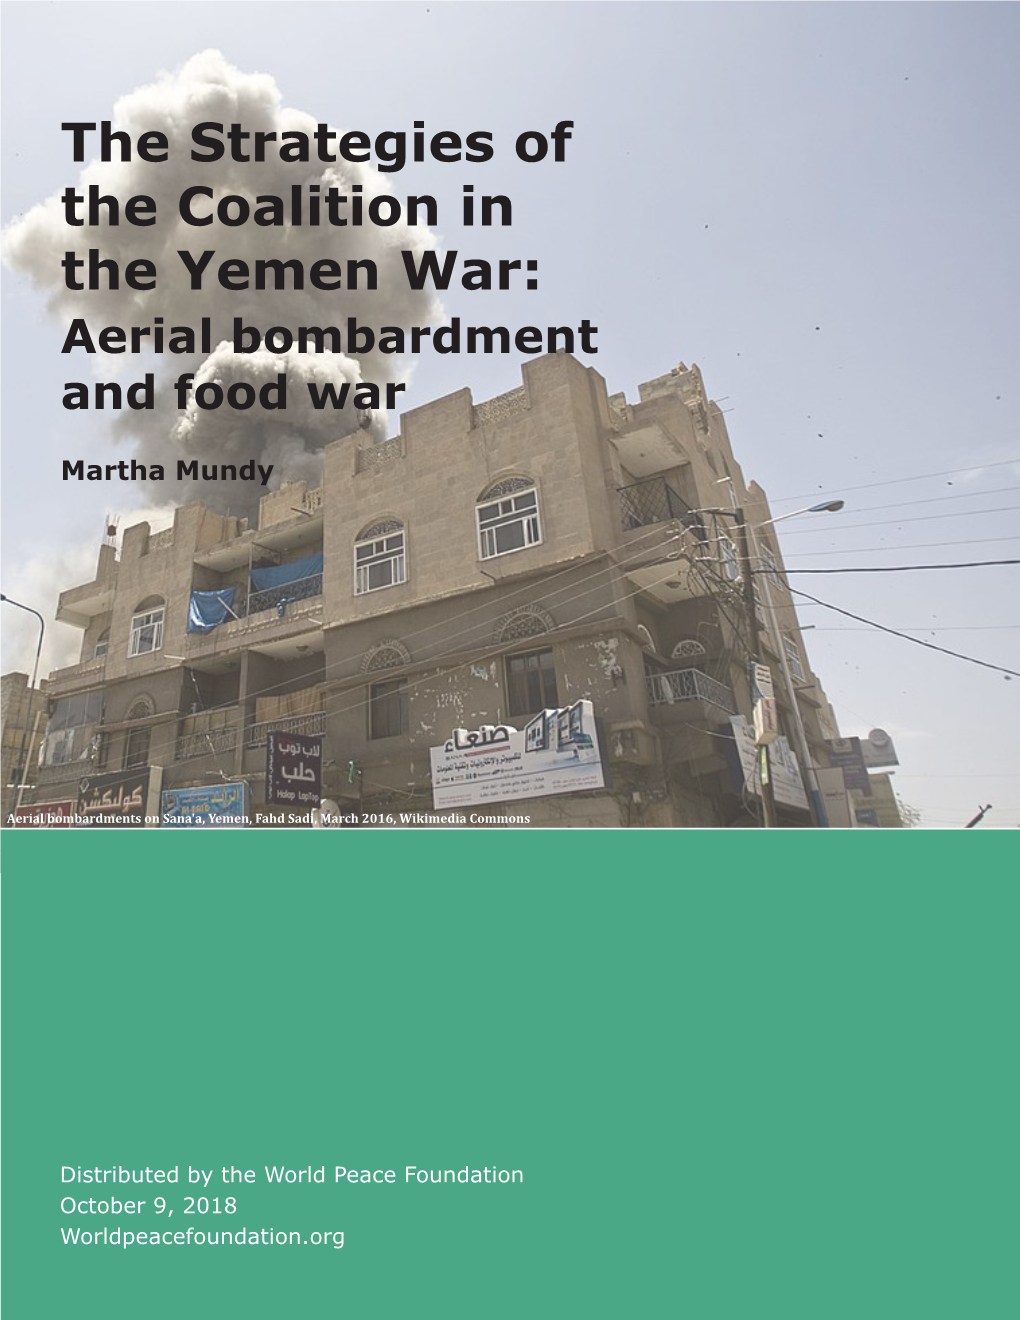 The Strategies of the Coalition in the Yemen War: Aerial Bombardment and Food War